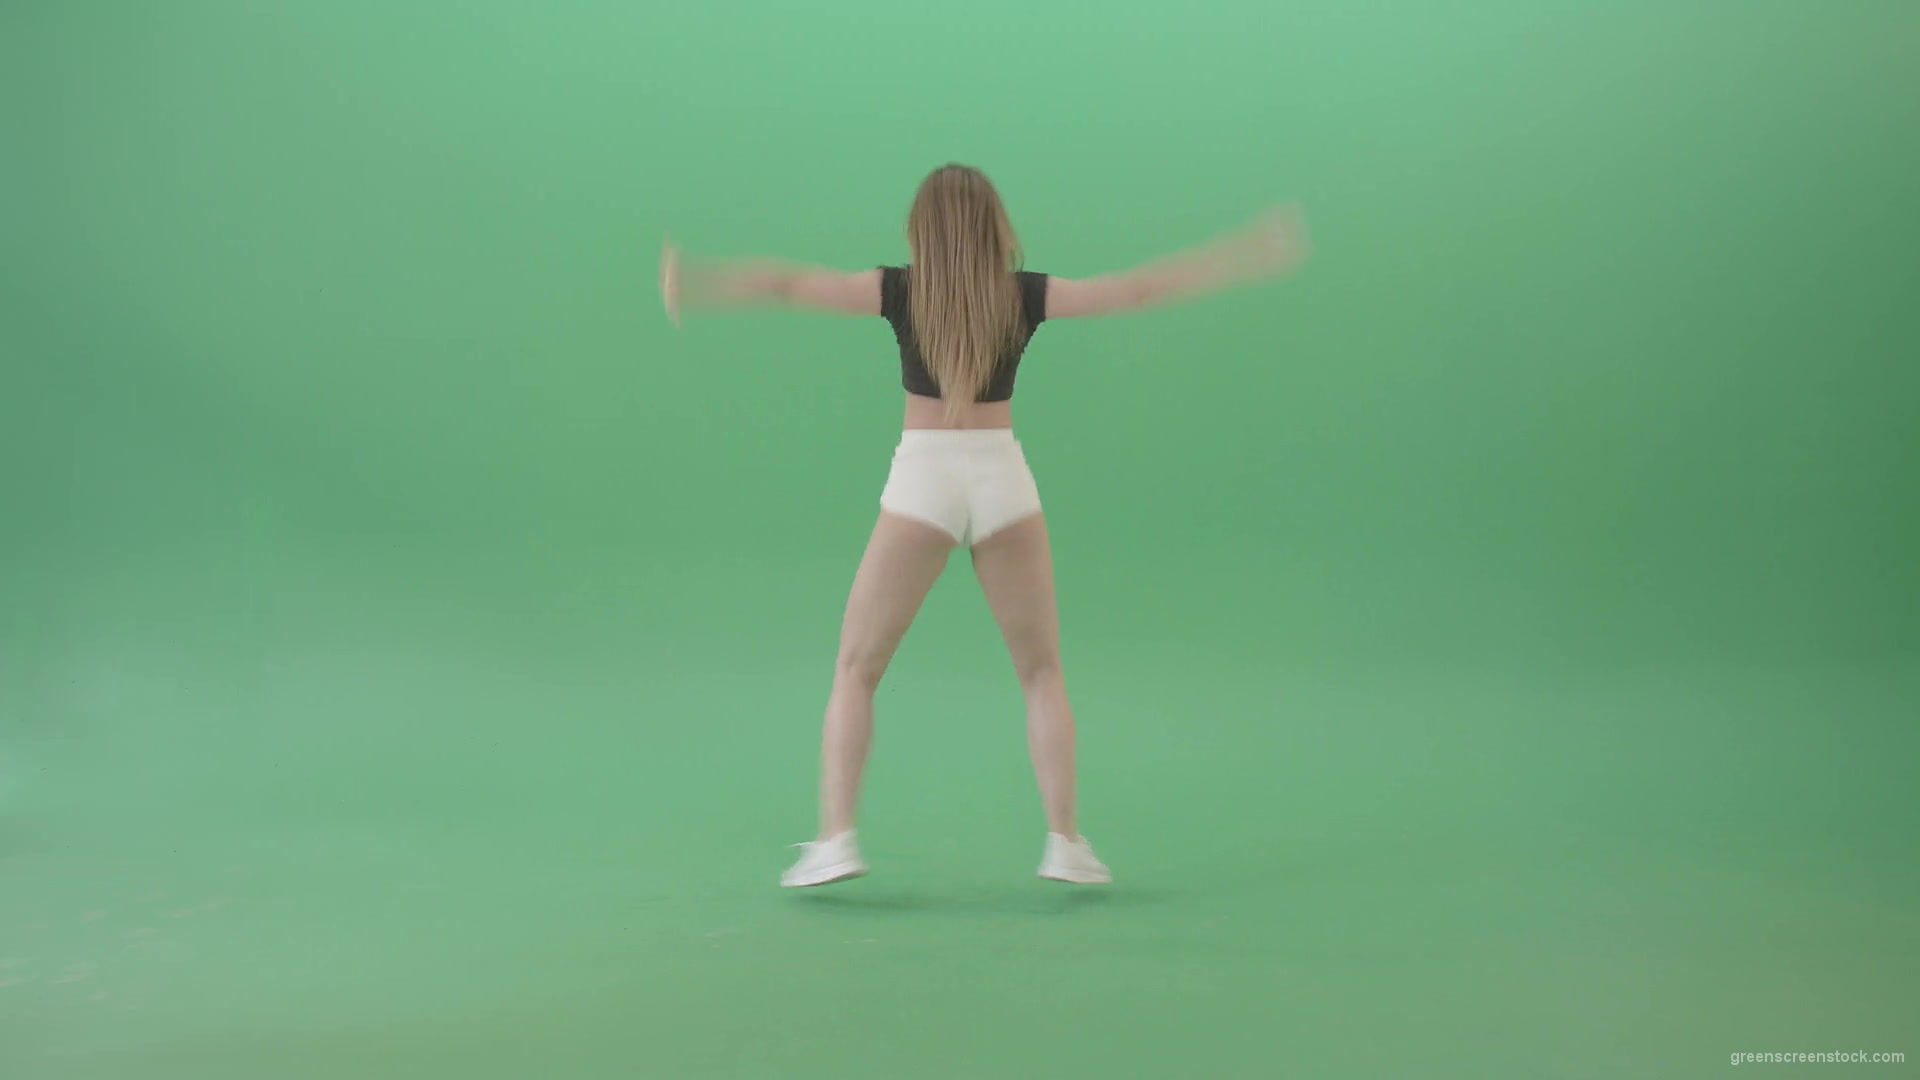 Beauty-girl-sрaking-ass-and-hips-dancing-Twerk-Afro-Dance-isolated-on-green-screen-4K-Video-Footage-1920_005 Green Screen Stock